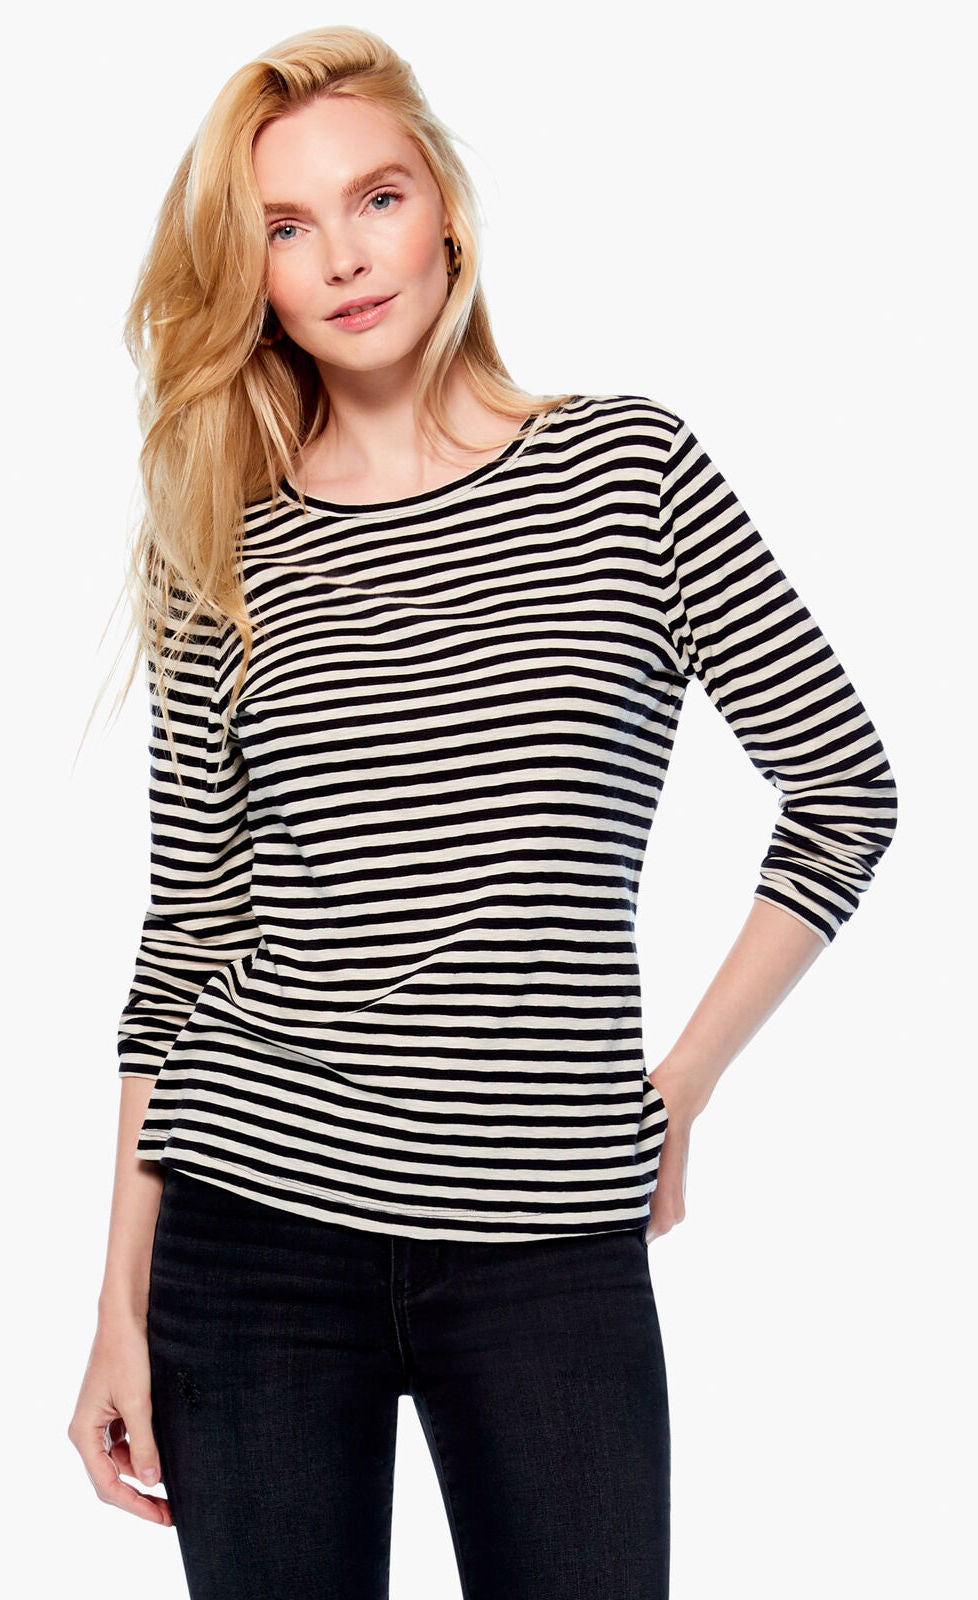 Front top half view of a woman wearing black pants and the nic + zoe saturday stripe top. This top is black and white striped. It has long sleeves and a round neck.